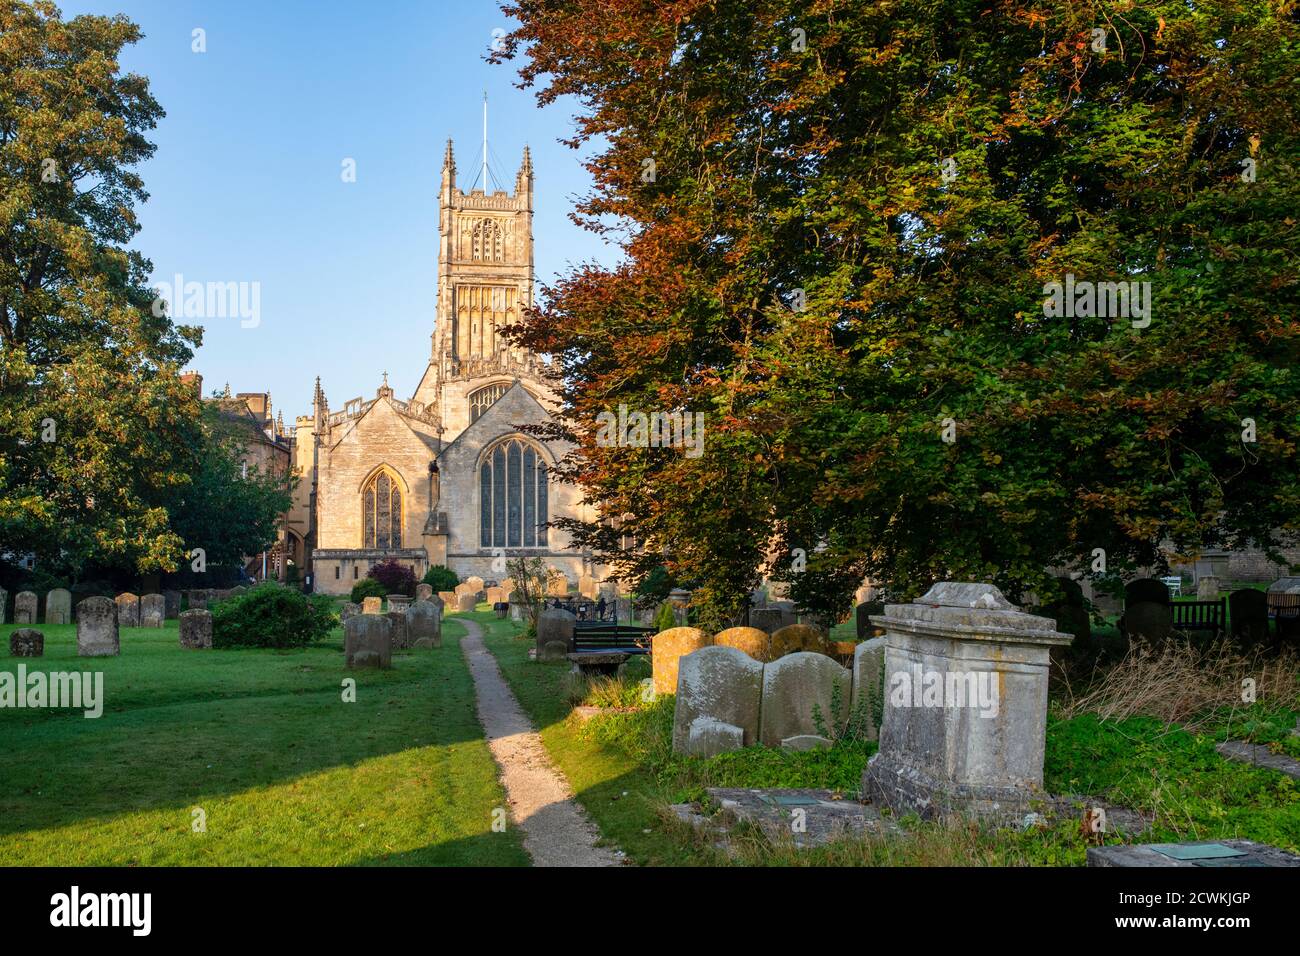 The Church of St. John the Baptist from the garden of rememberance at sunrise in autumn. Cirencester, Cotswolds, Gloucestershire, England Stock Photo